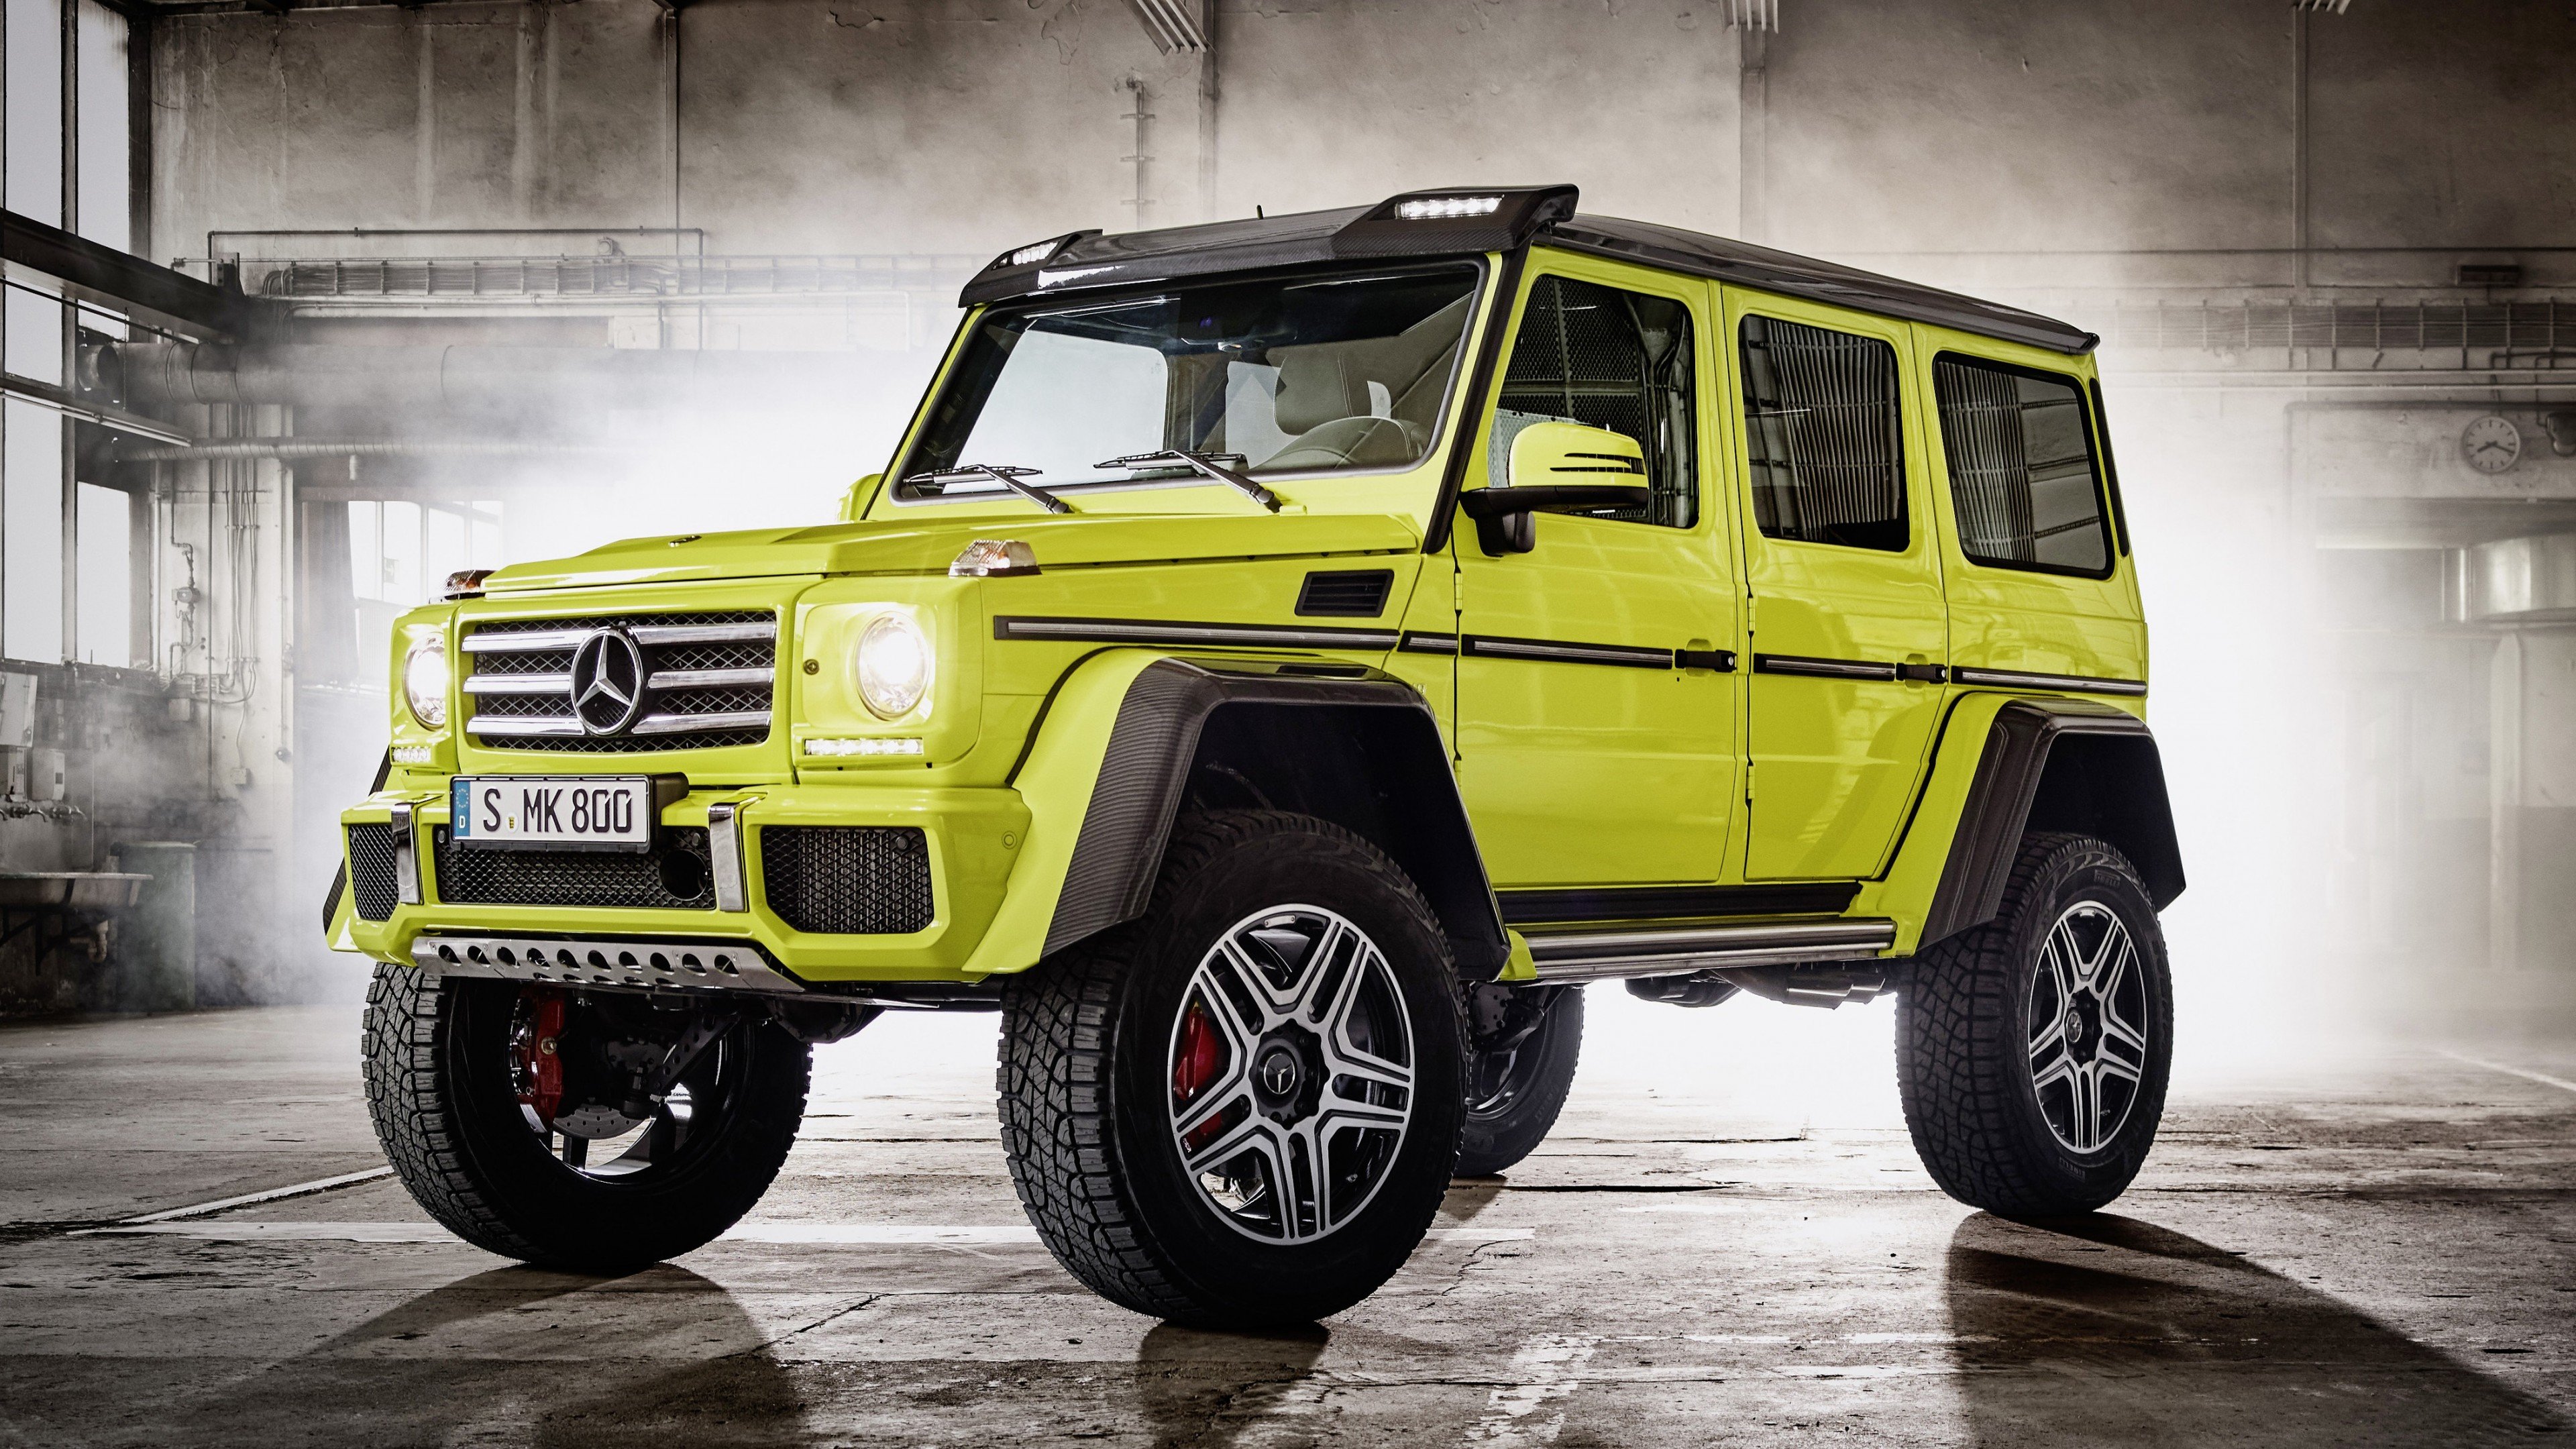 Wallpaper Mercedes Benz G SUV, Mercedes, G Class, Off Road, Yellow, Luxury Cars, Cars & Bikes